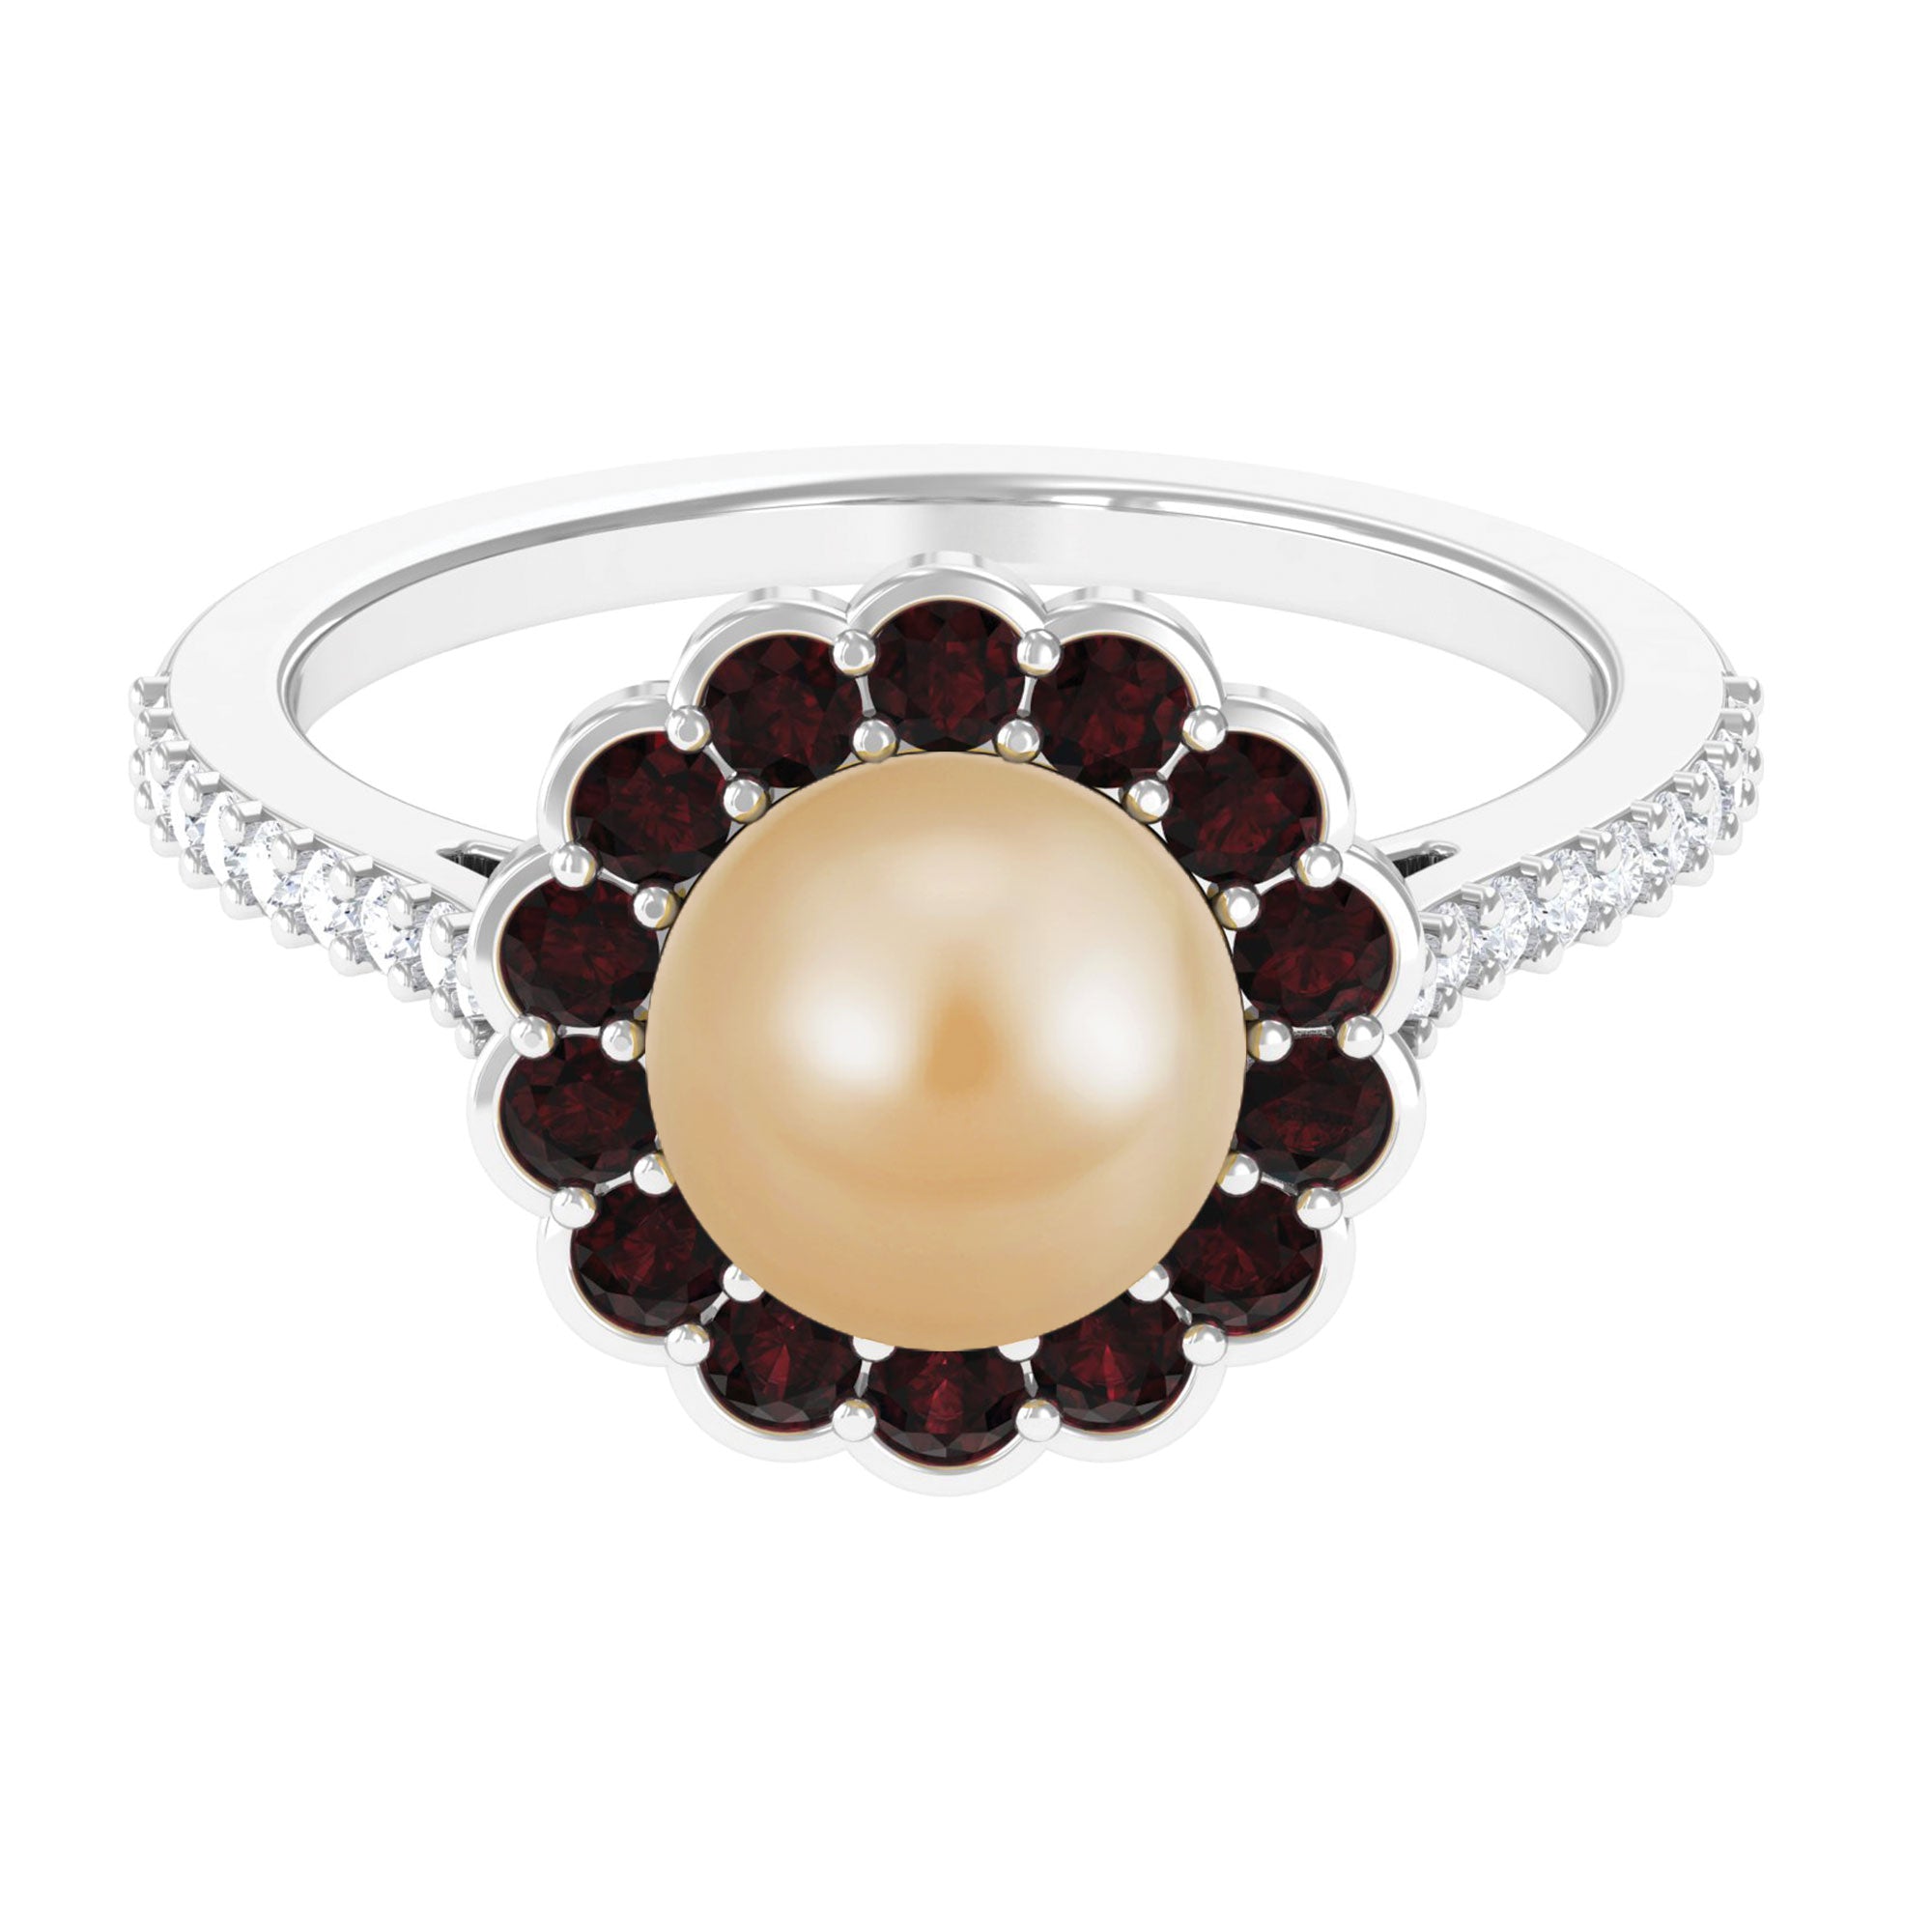 South Sea Pearl Halo Engagement Ring with Garnet and Diamond South Sea Pearl-AAA Quality - Arisha Jewels